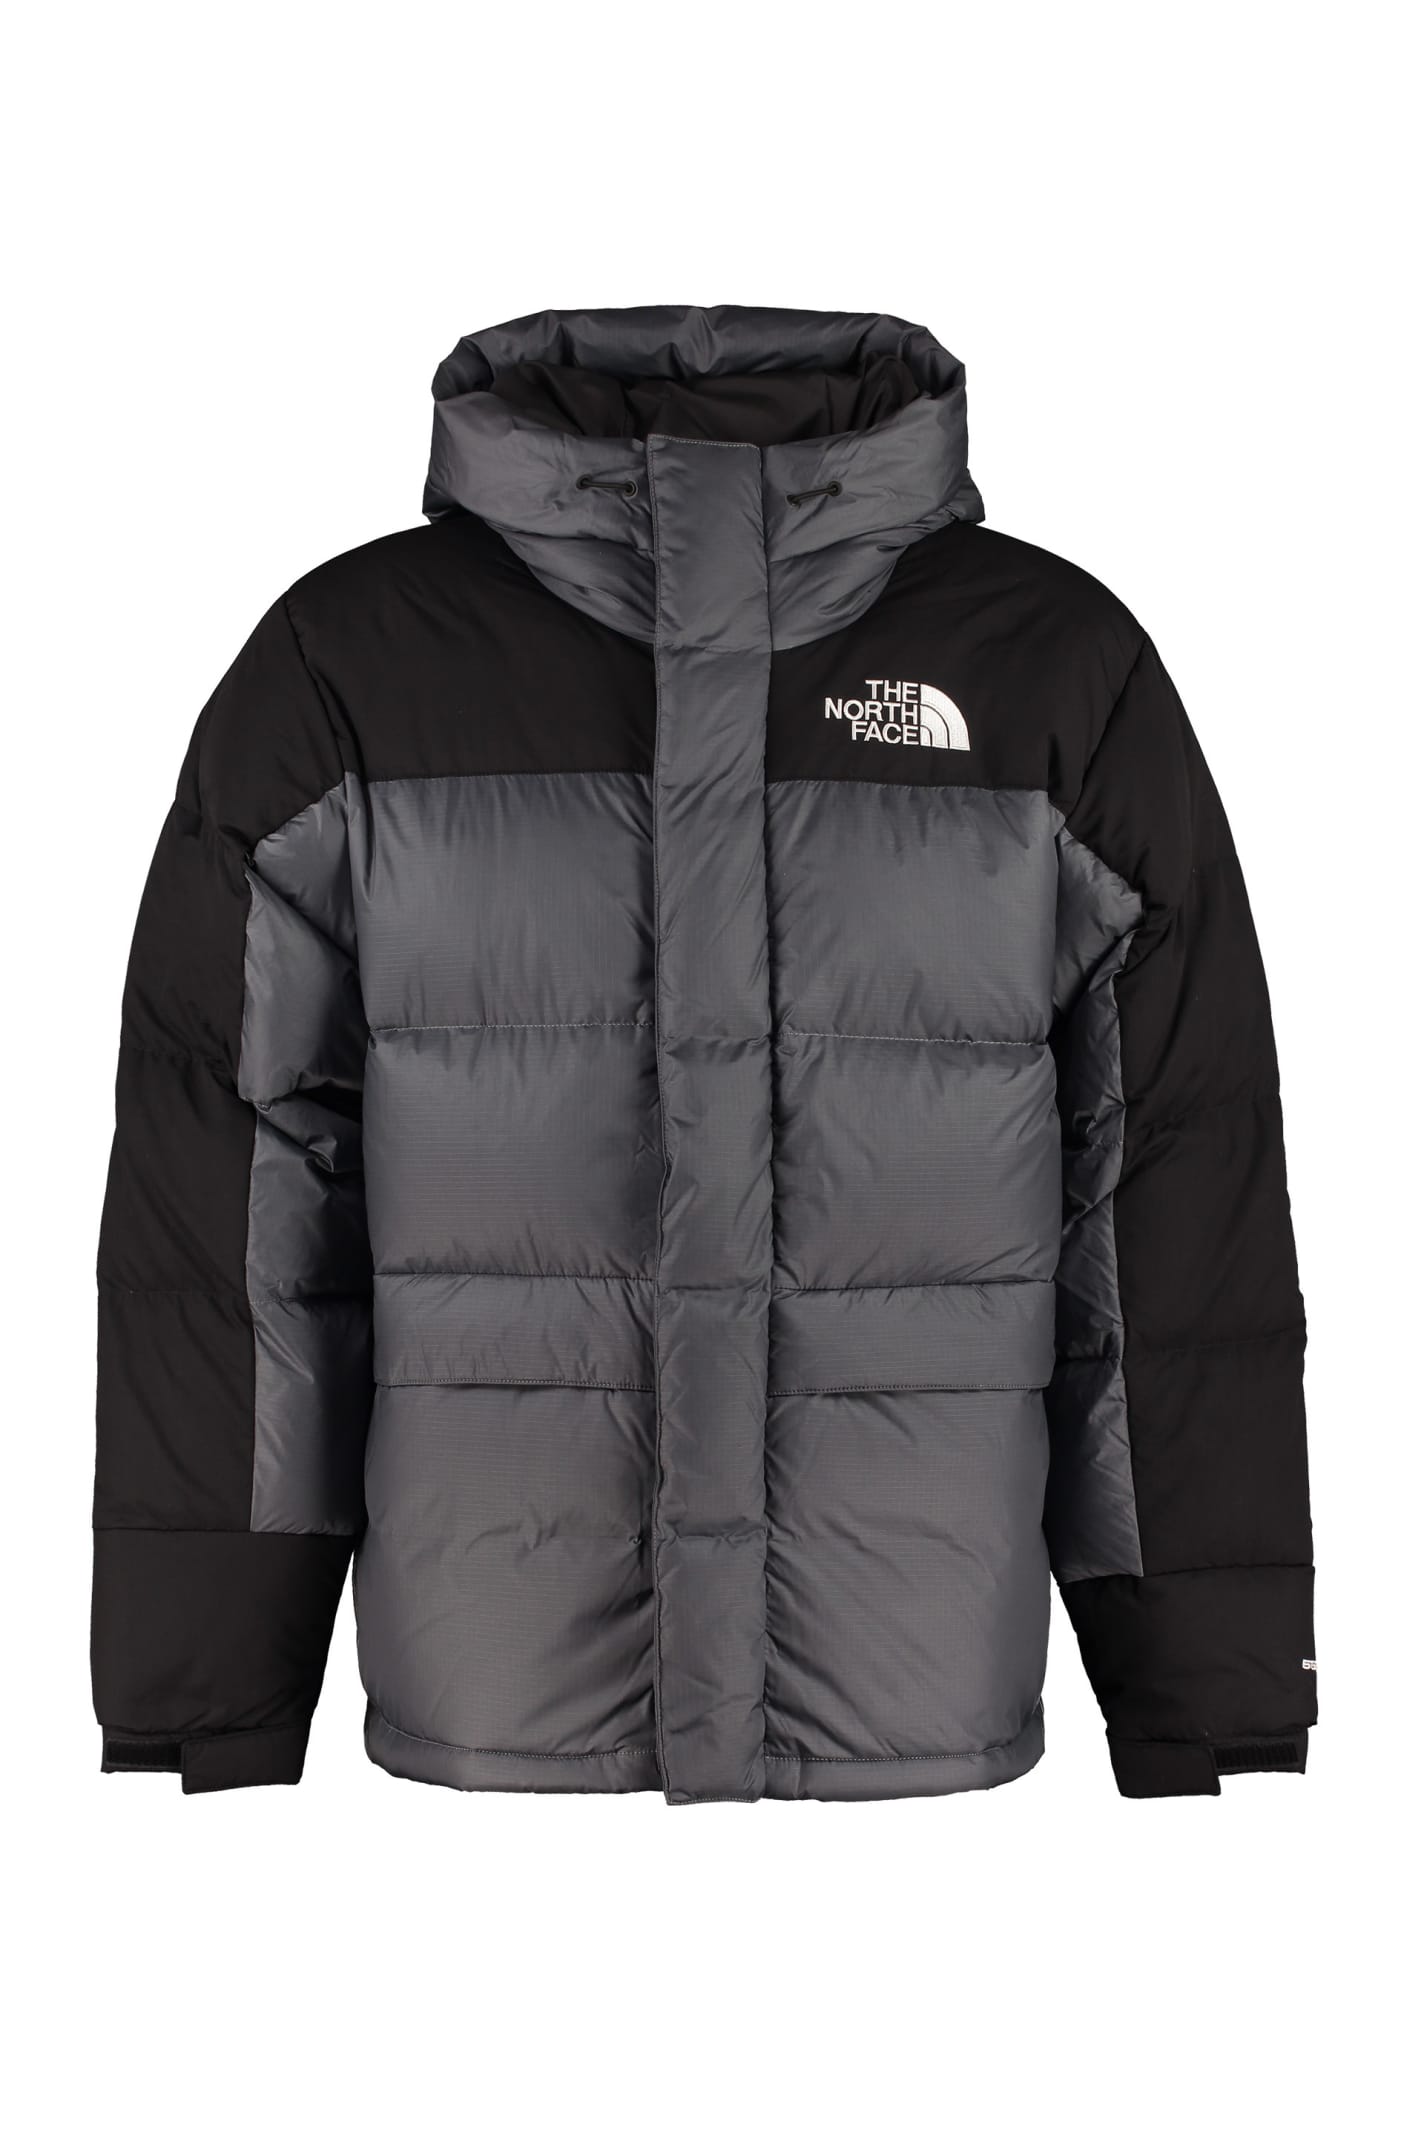 THE NORTH FACE HMLYN PADDED JACKET,11627391